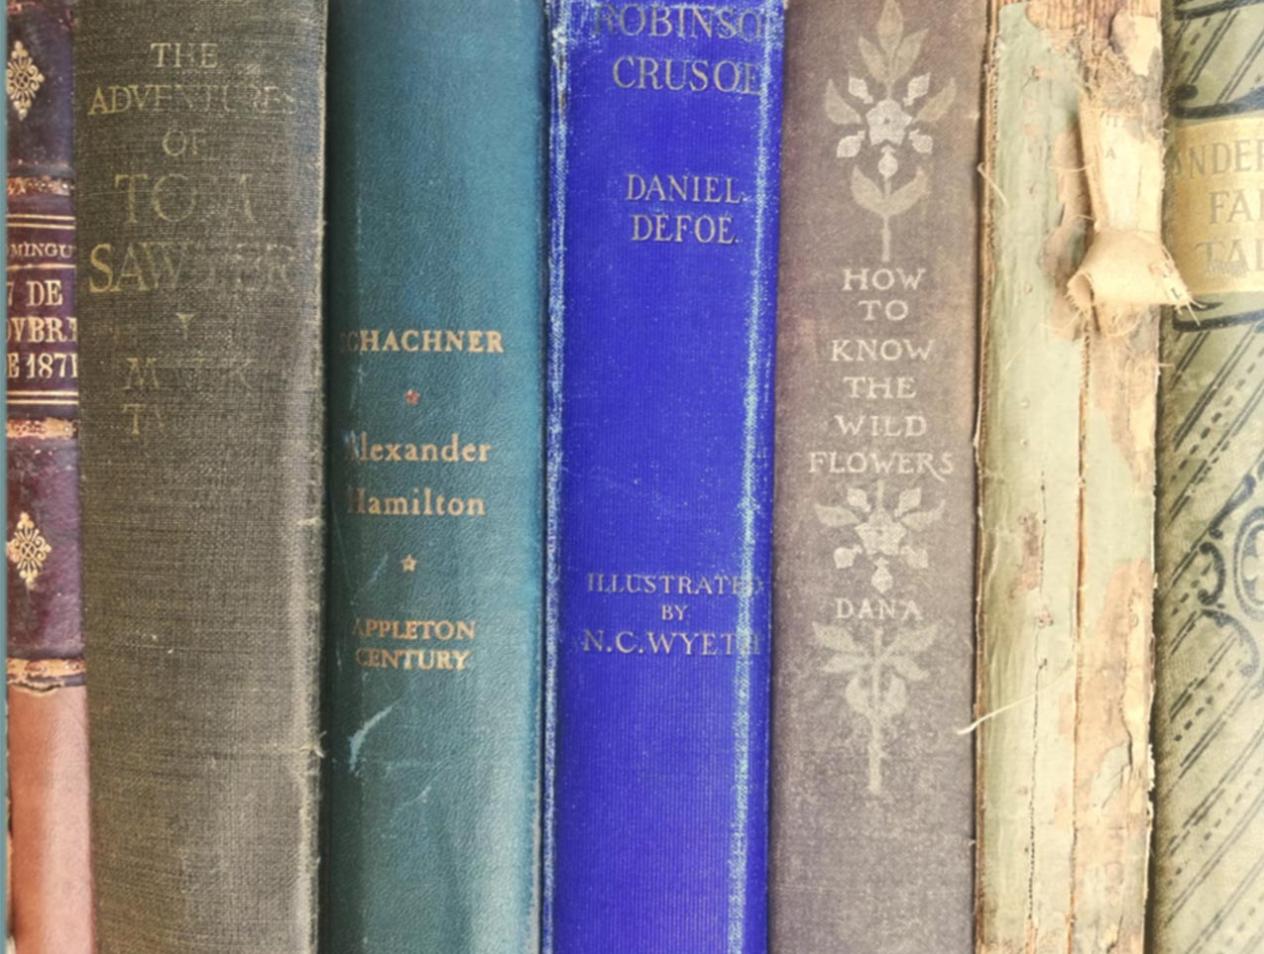 Book spines image